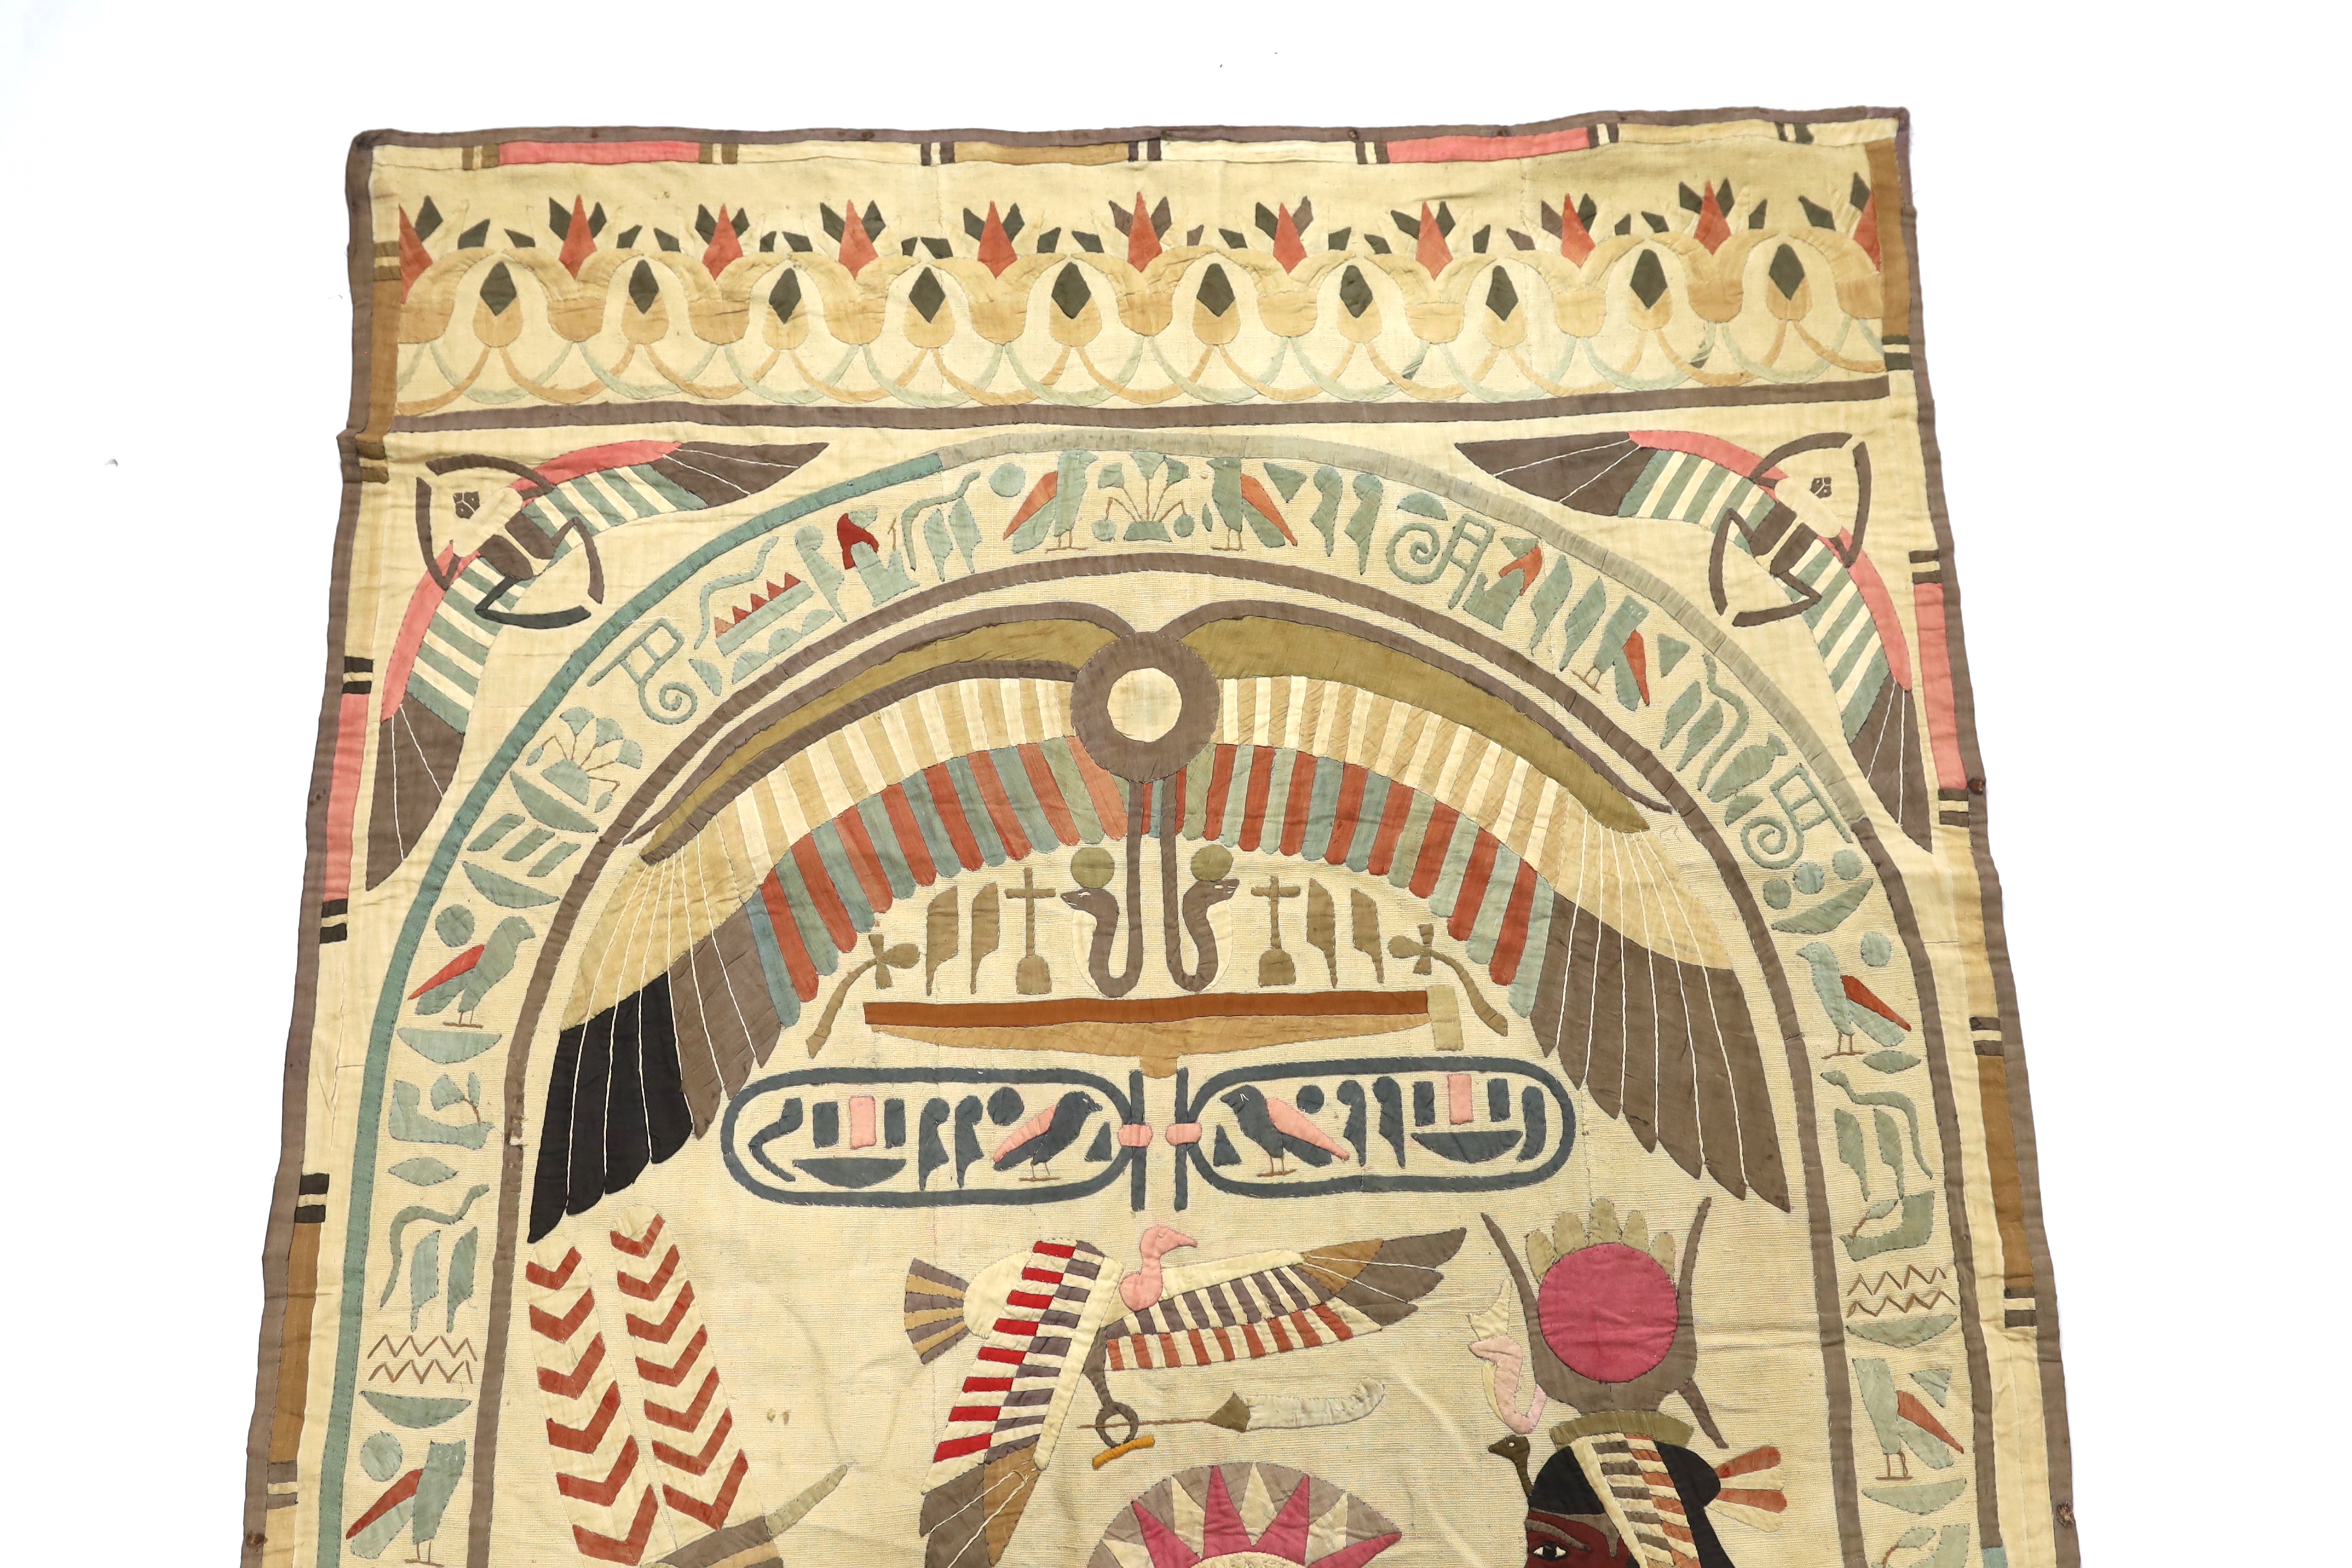 A 1930’s large Egyptian appliqué wall hanging, depicting Wadjet, (Goddess and protector of Kings) and Amun (God of wind) surrounded by hieroglyphic decorative symbols, 134cm wide x 268cm long